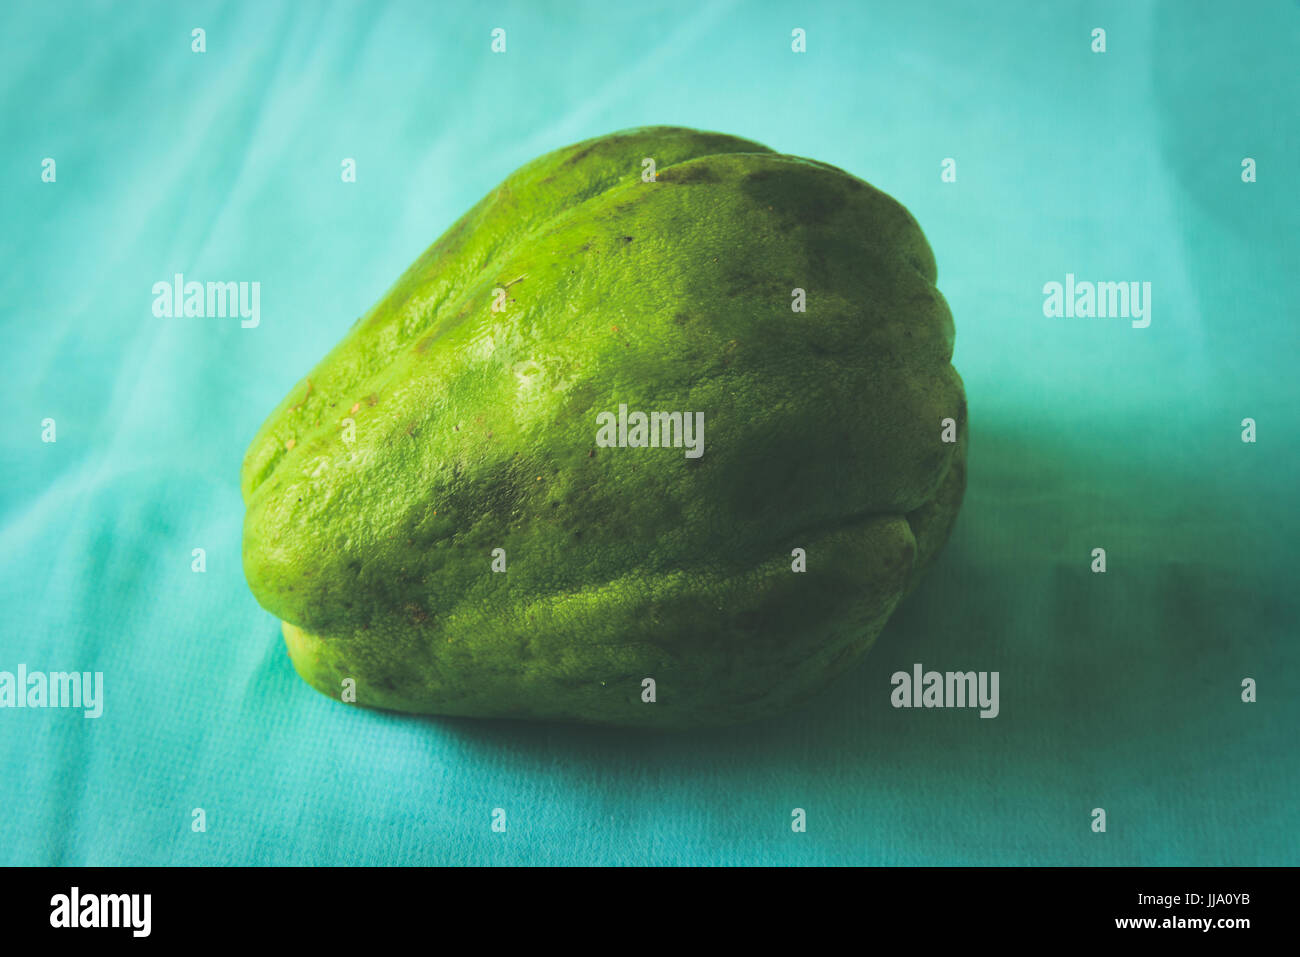 Freshly picked chayote from a local farmer's market. Stock Photo